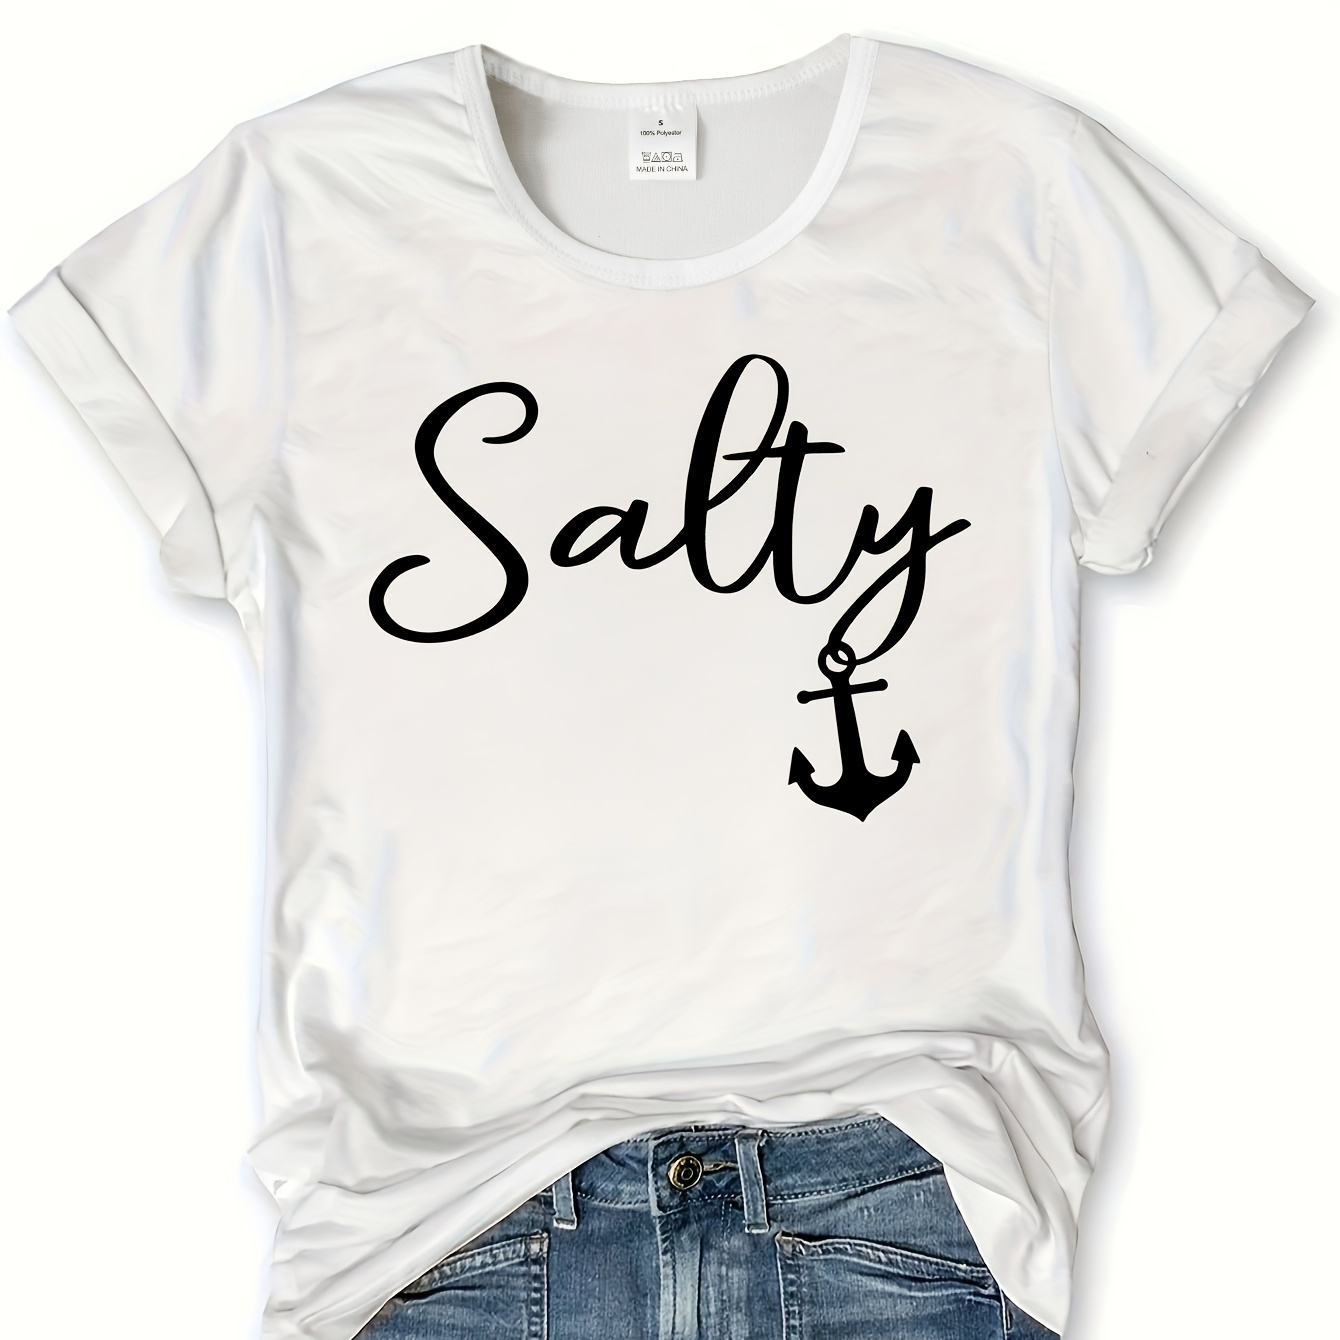 

Salty Print T-shirt, Short Sleeve Crew Neck Casual Top For Summer & Spring, Women's Clothing